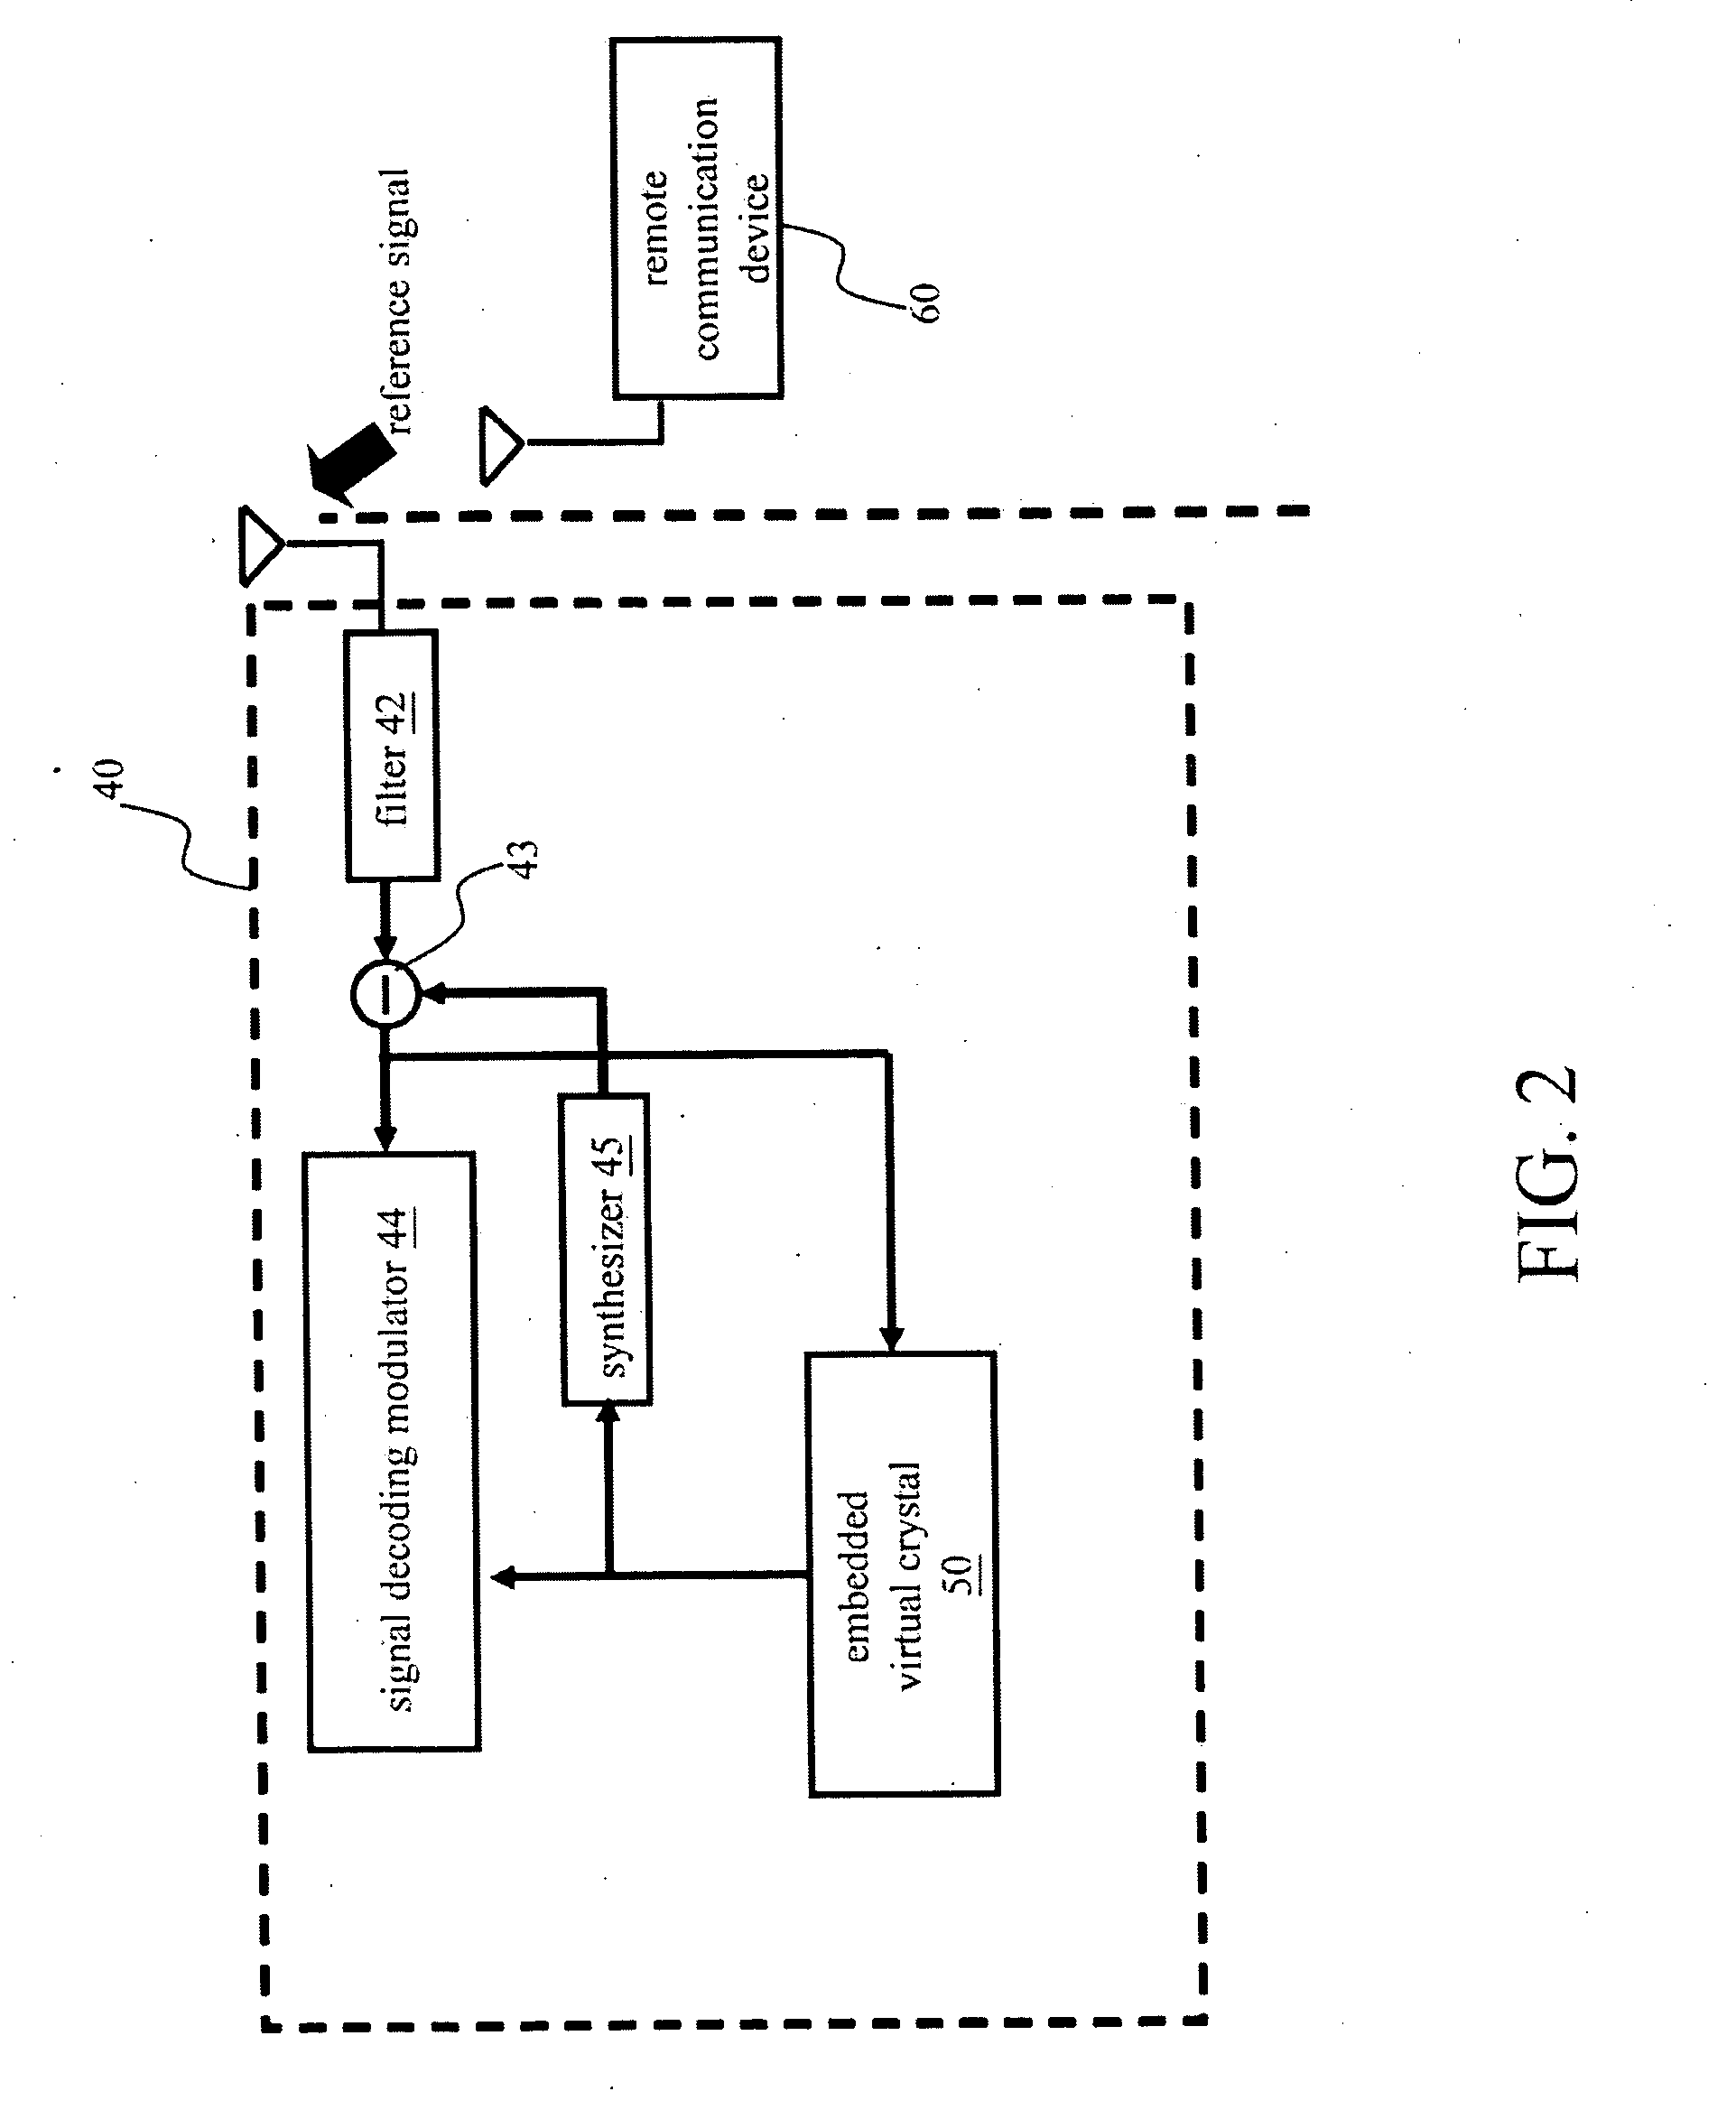 Crystal-less Communications Device and Self-Calibrated Embedded Virtual Crystal Clock Generation Method